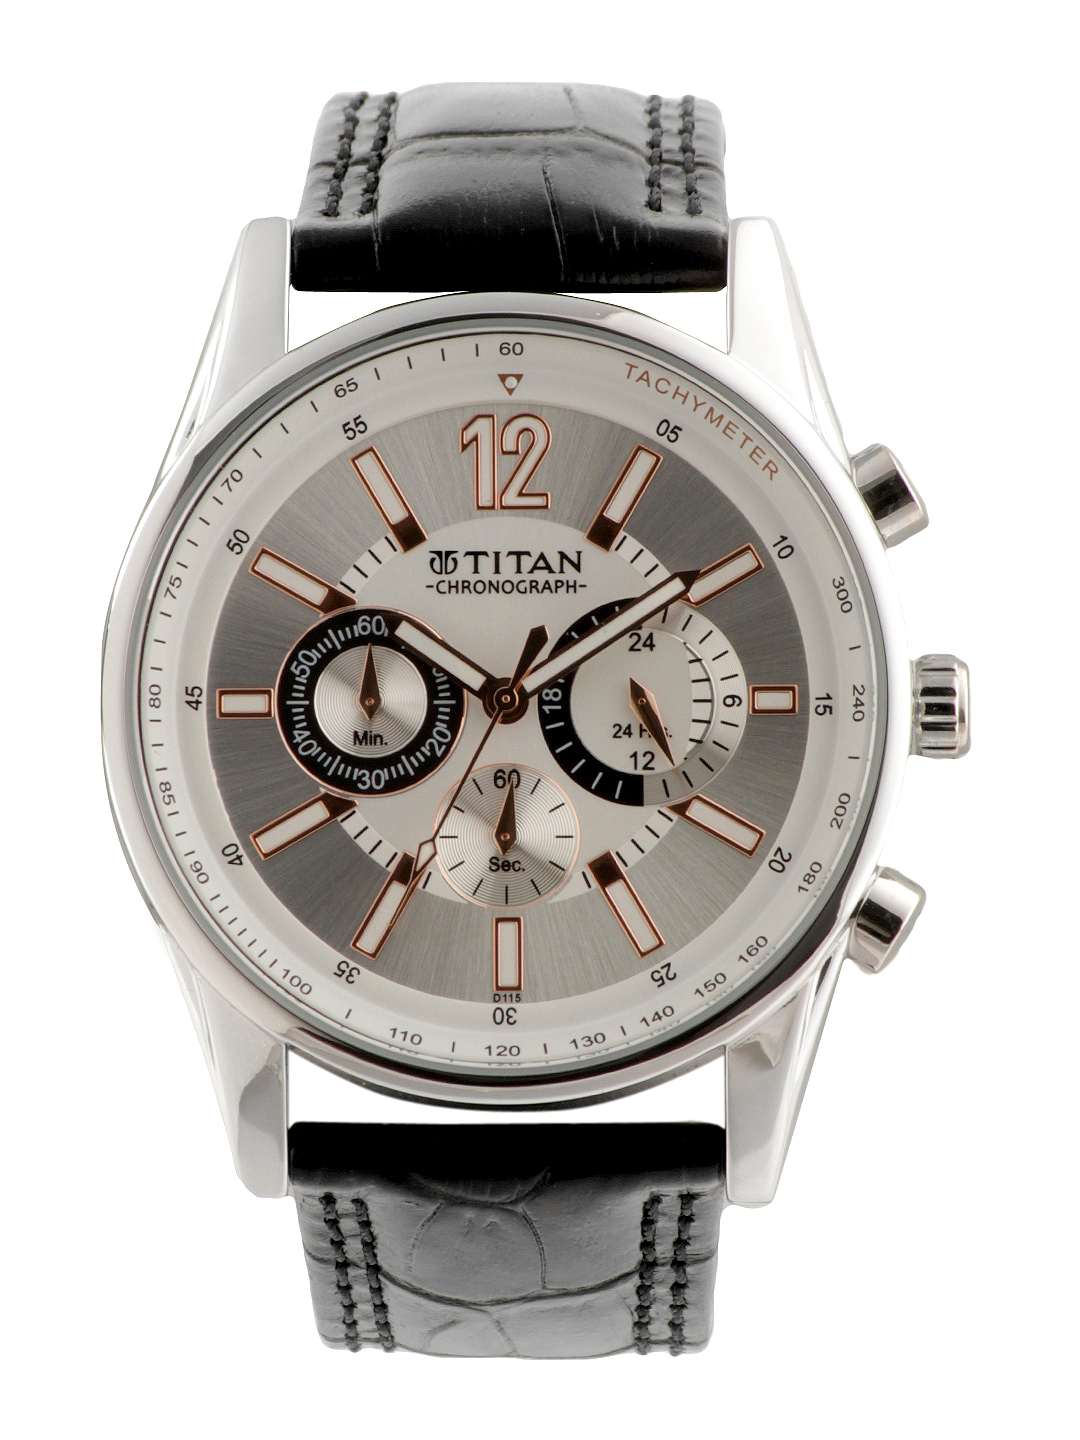 TITAN Men Chronograph Leather Watch 1489KL01 - Watches/Accessories for